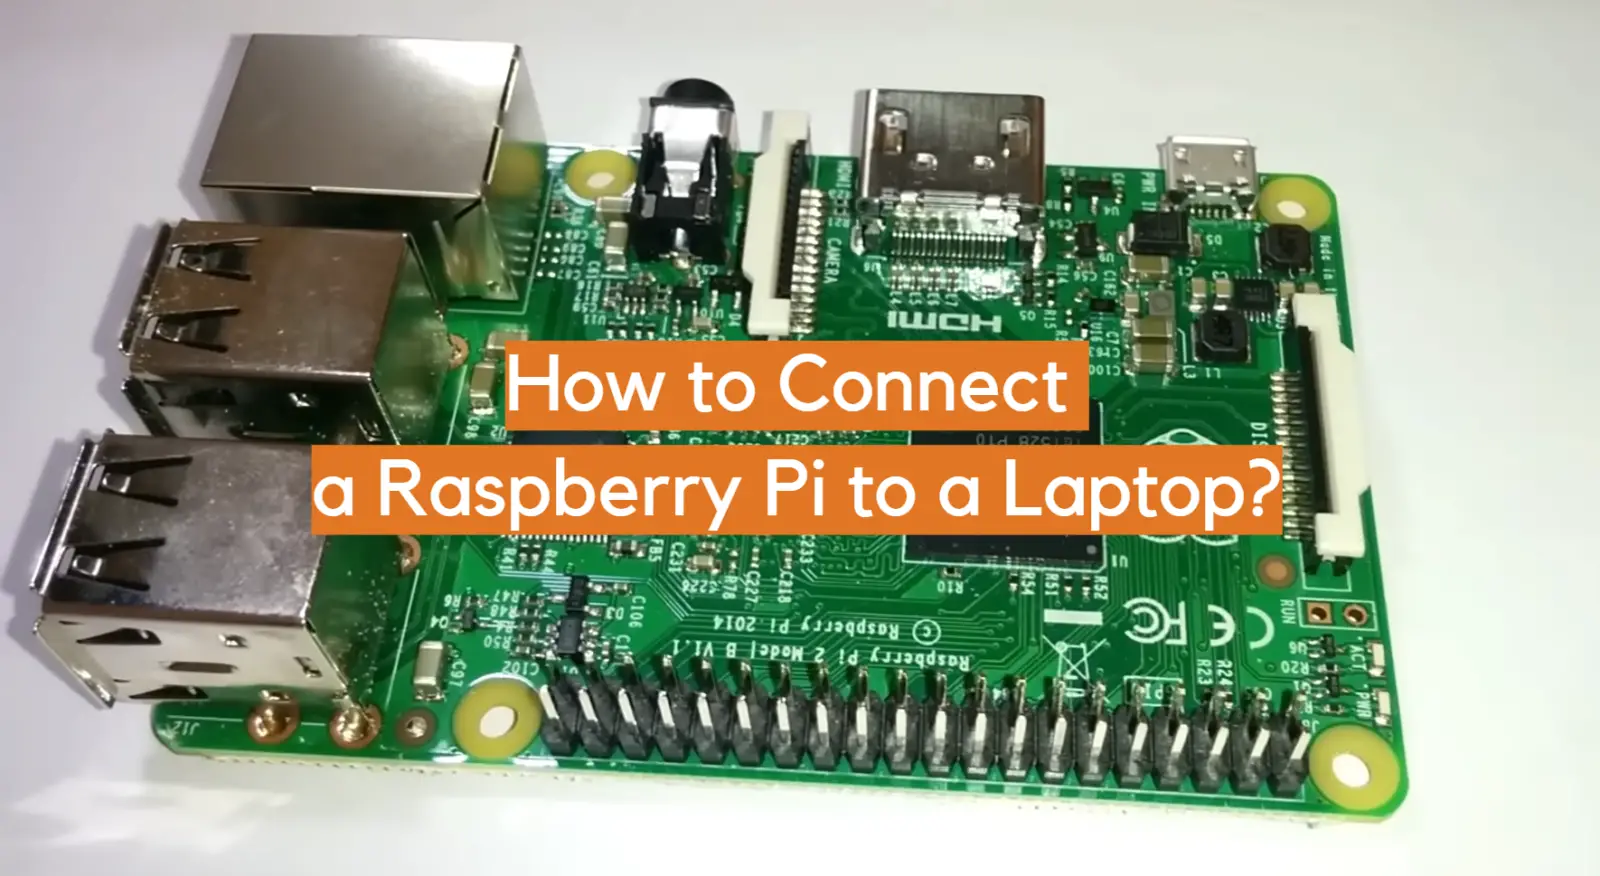 How to Connect a Raspberry Pi to a Laptop?